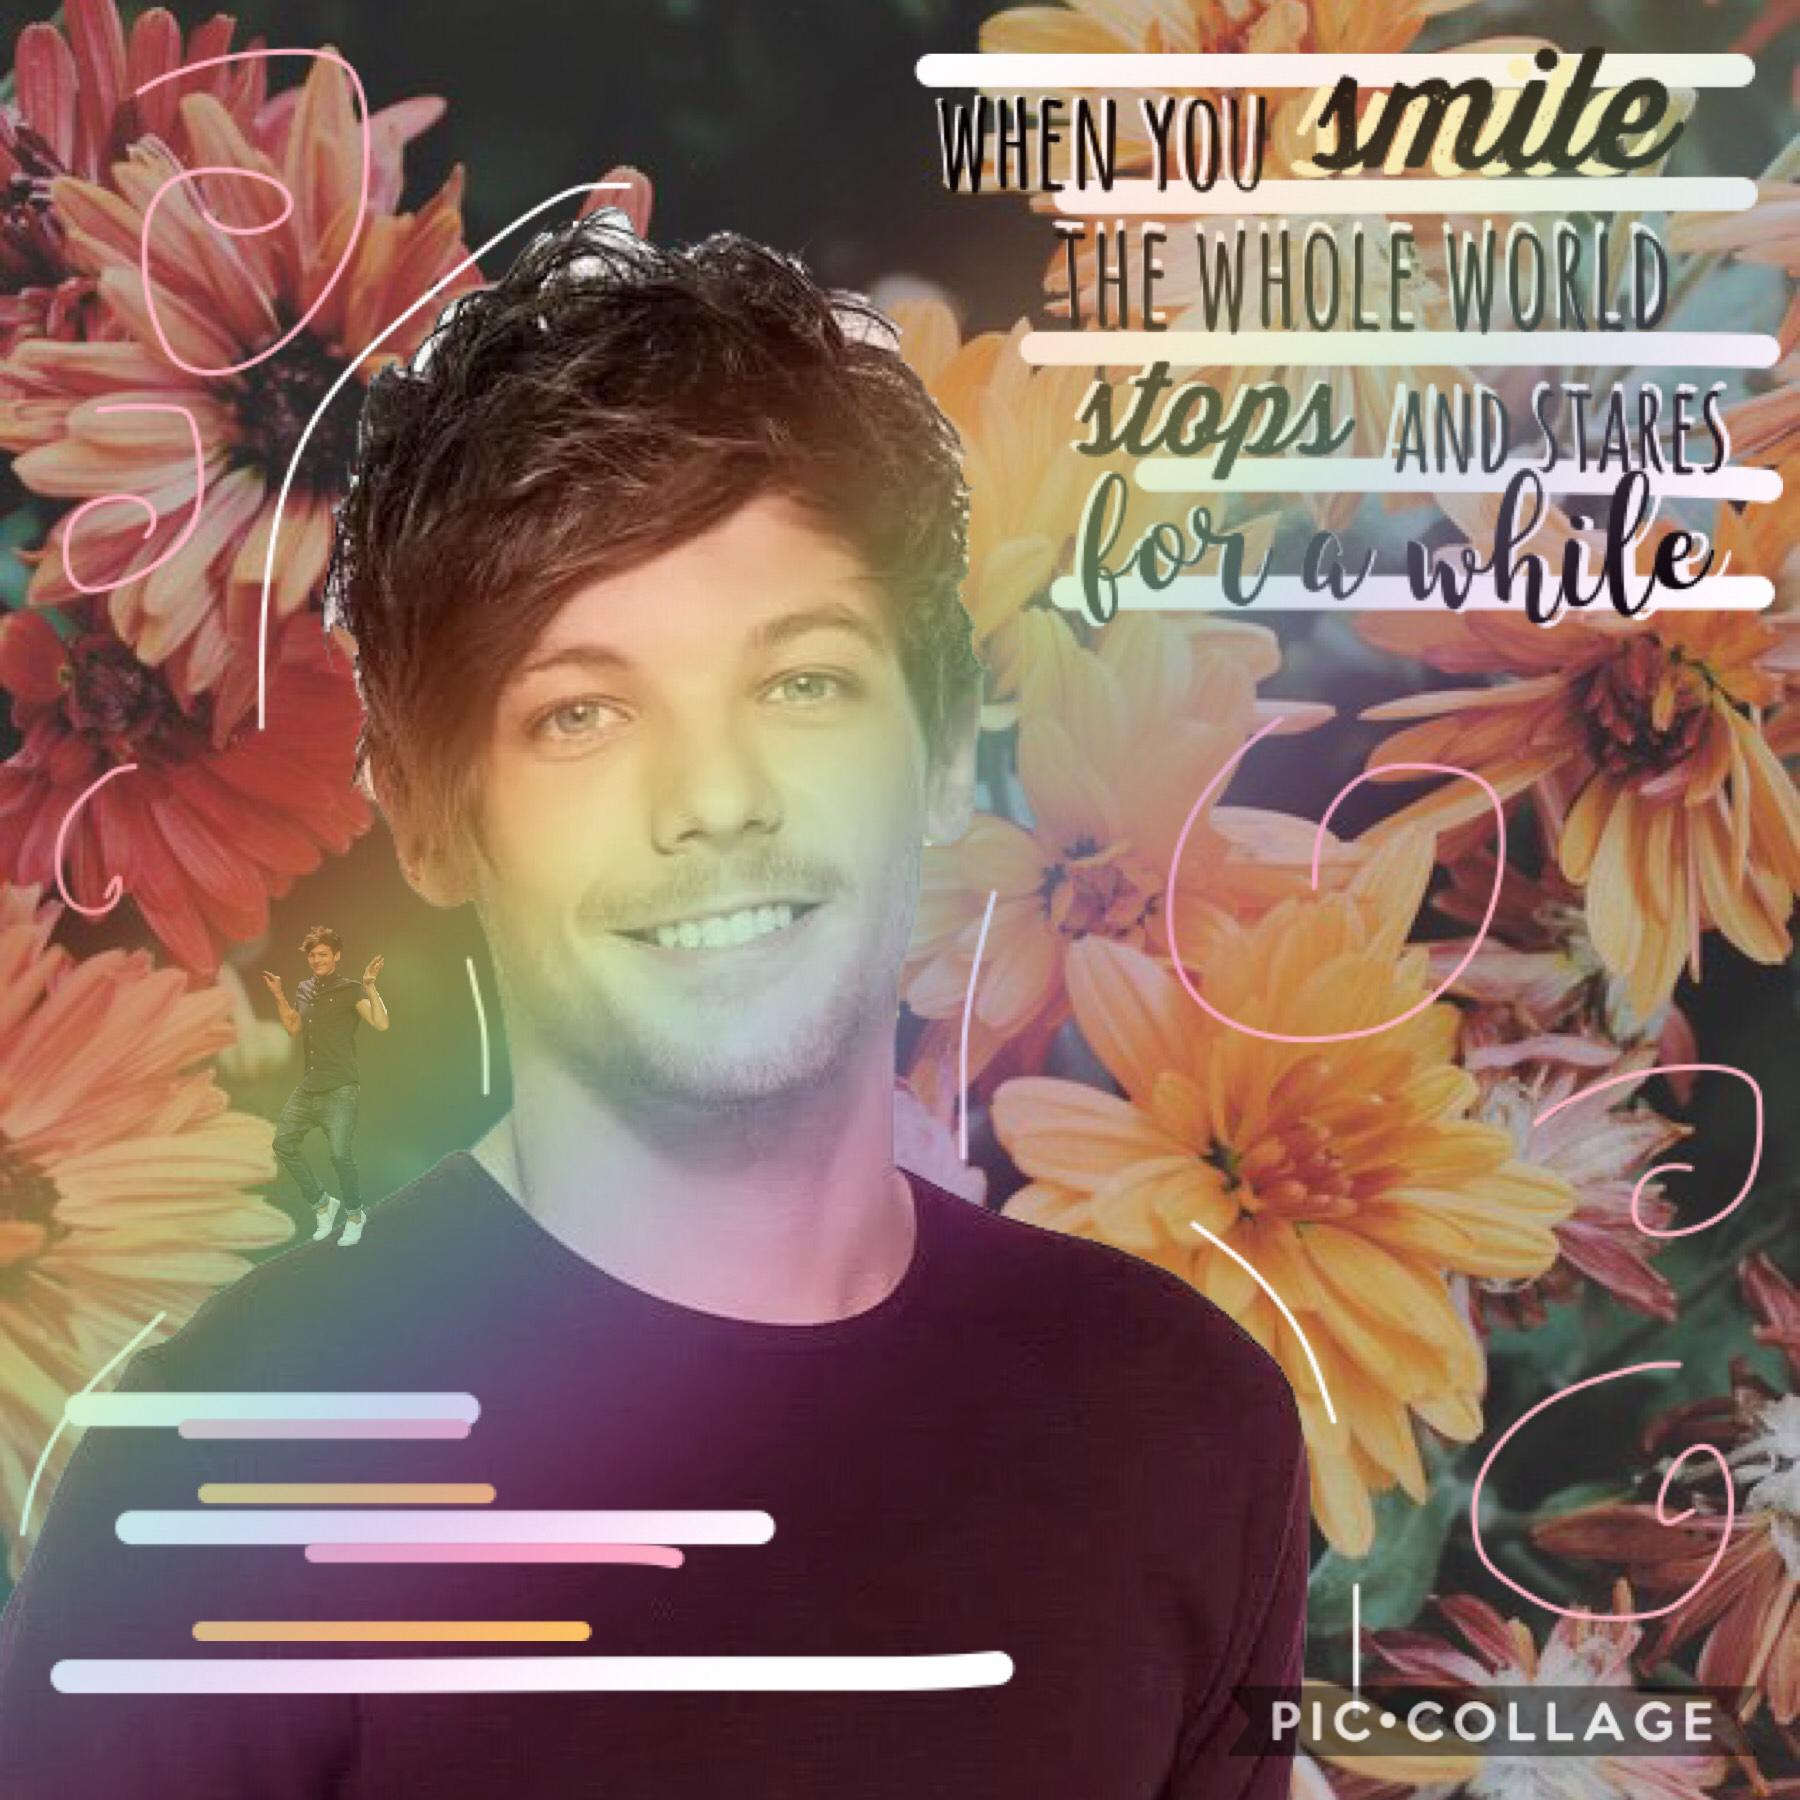 aaah isn’t his smile absolutely beautiful ?? what an angel :’) and yes, that is little lou bird perched on his shoulder ... I had to. not sorry. 